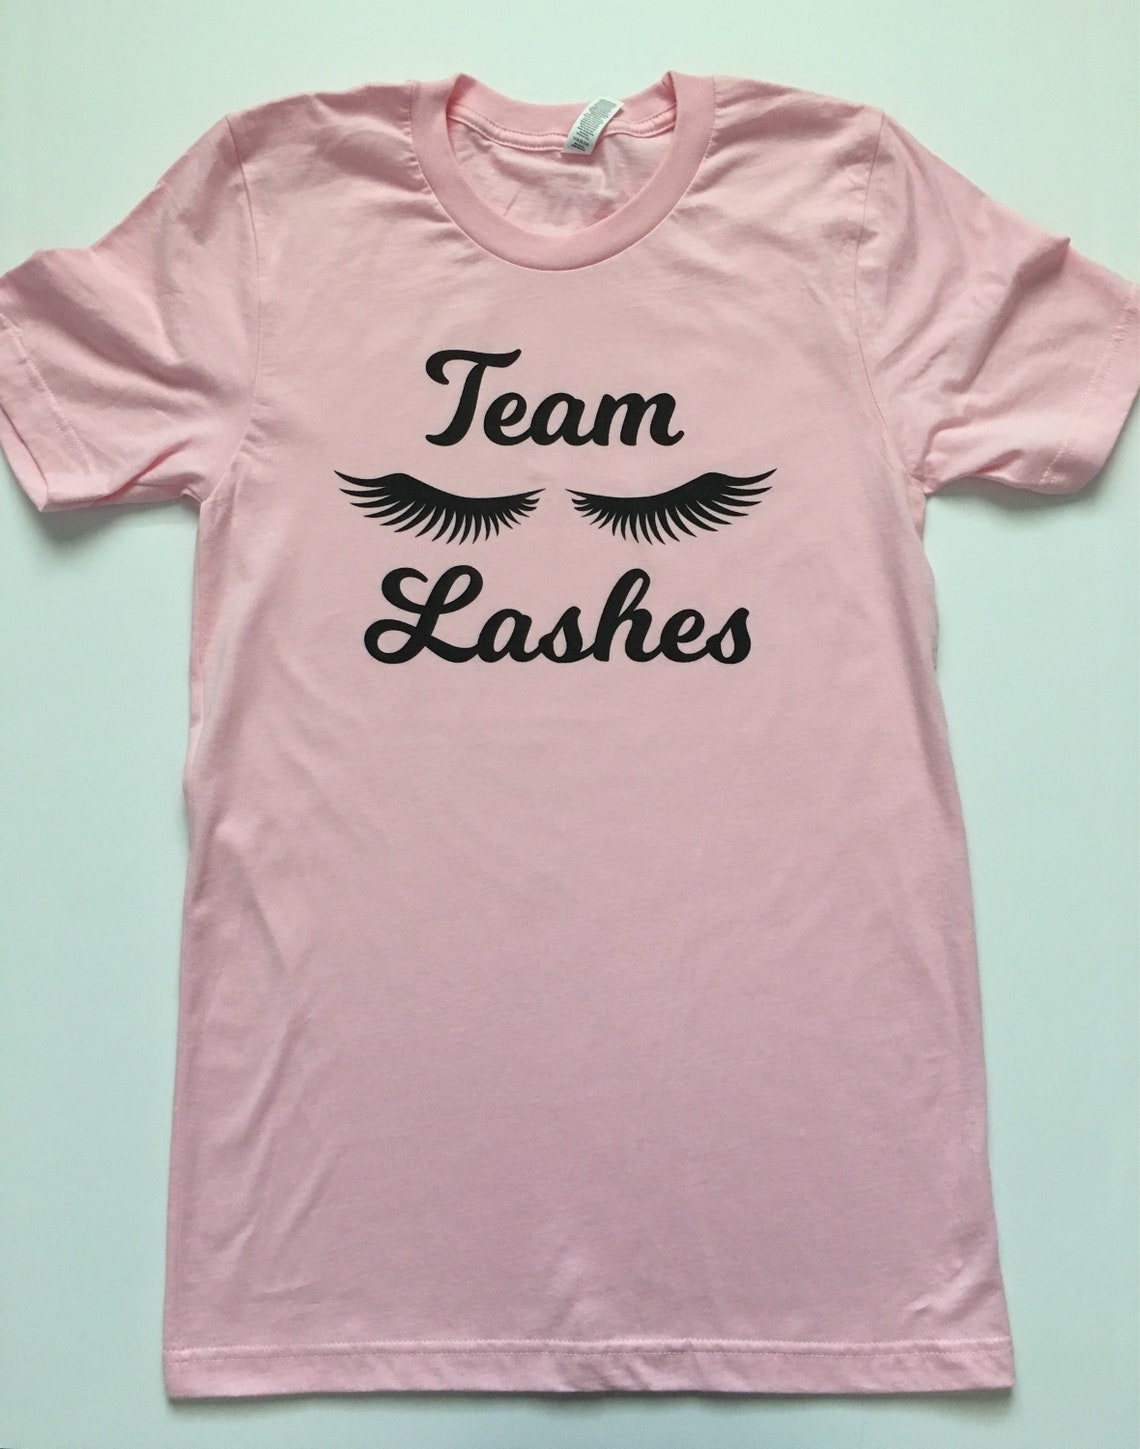 ONE Gender Reveal Shirts. Staches and Lashes. Gender Reveal - Etsy